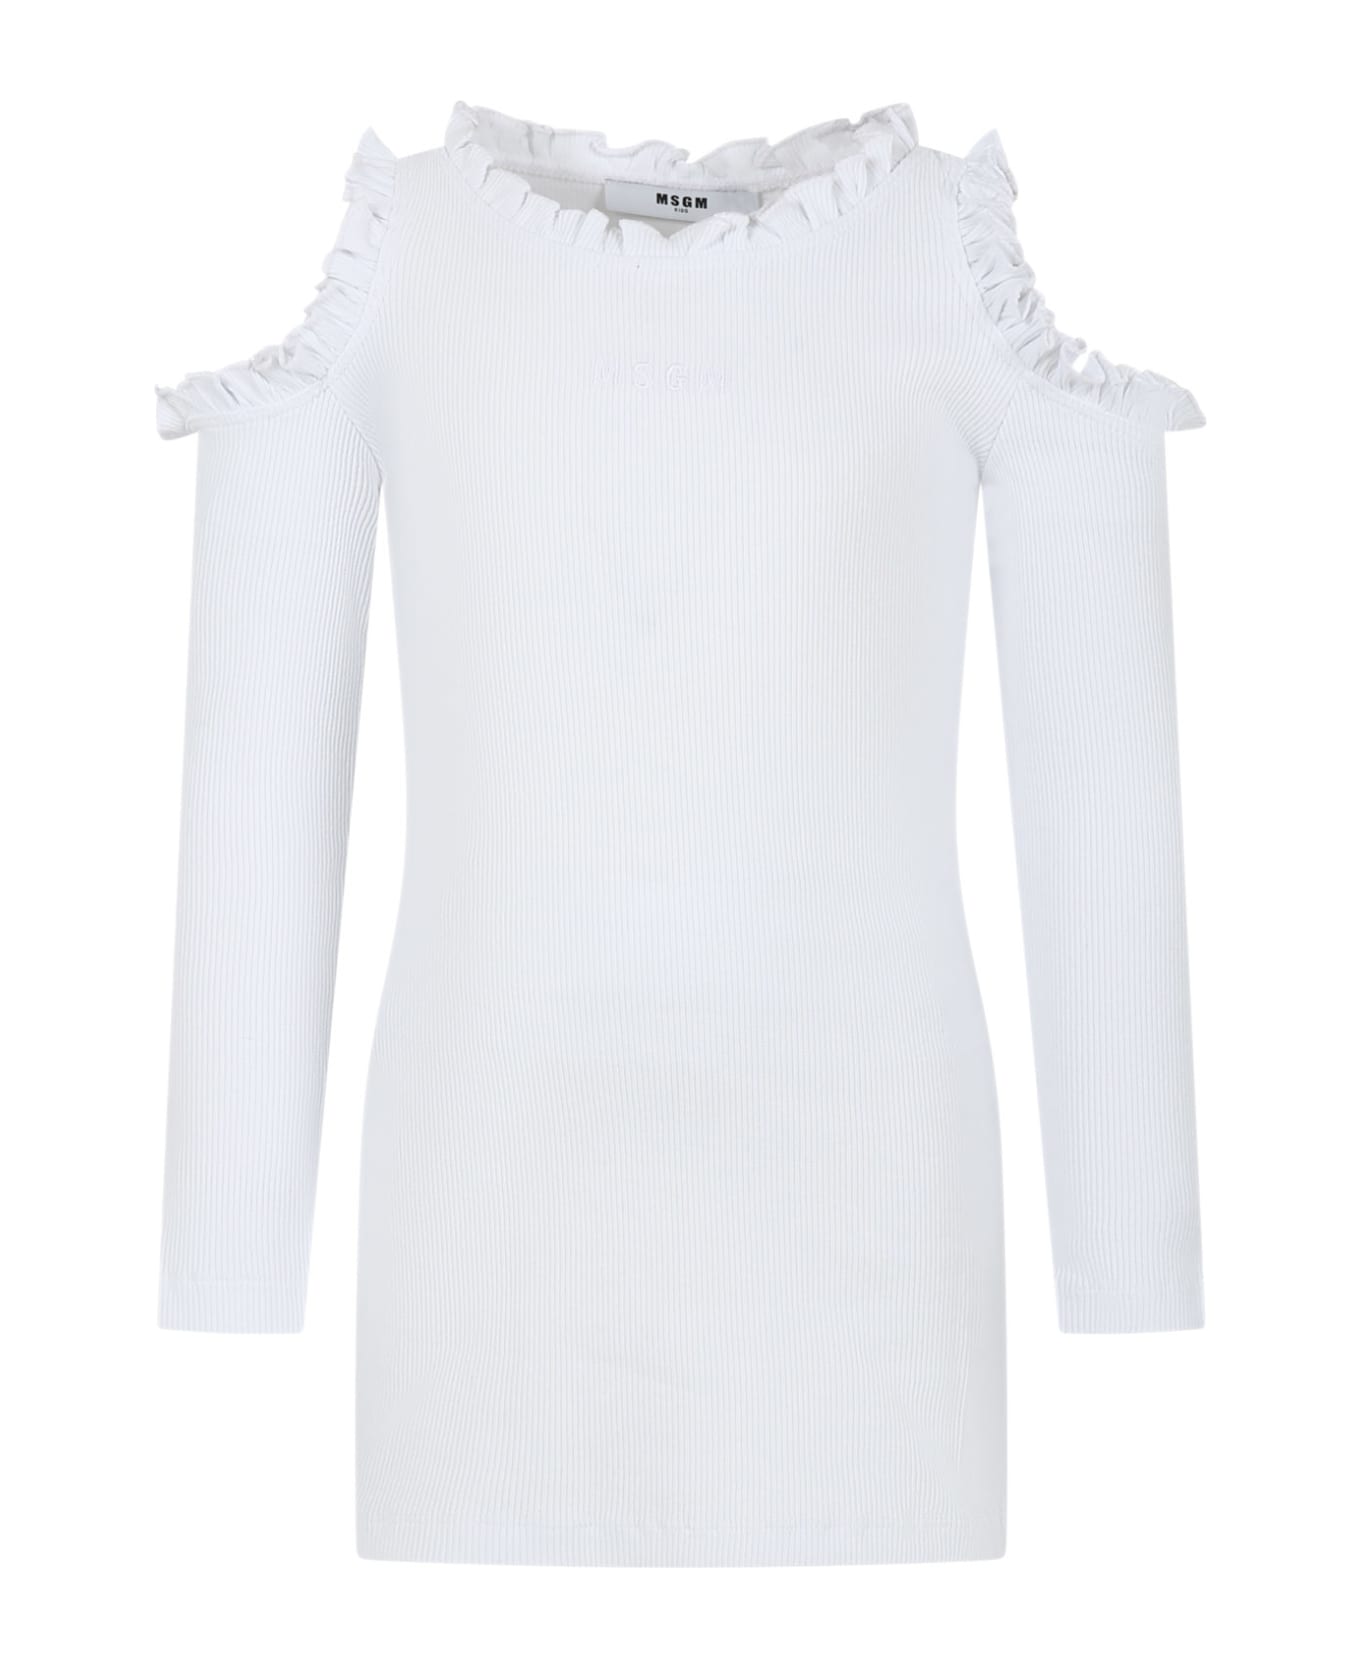 MSGM White Dress For Girl With Ruffles - White